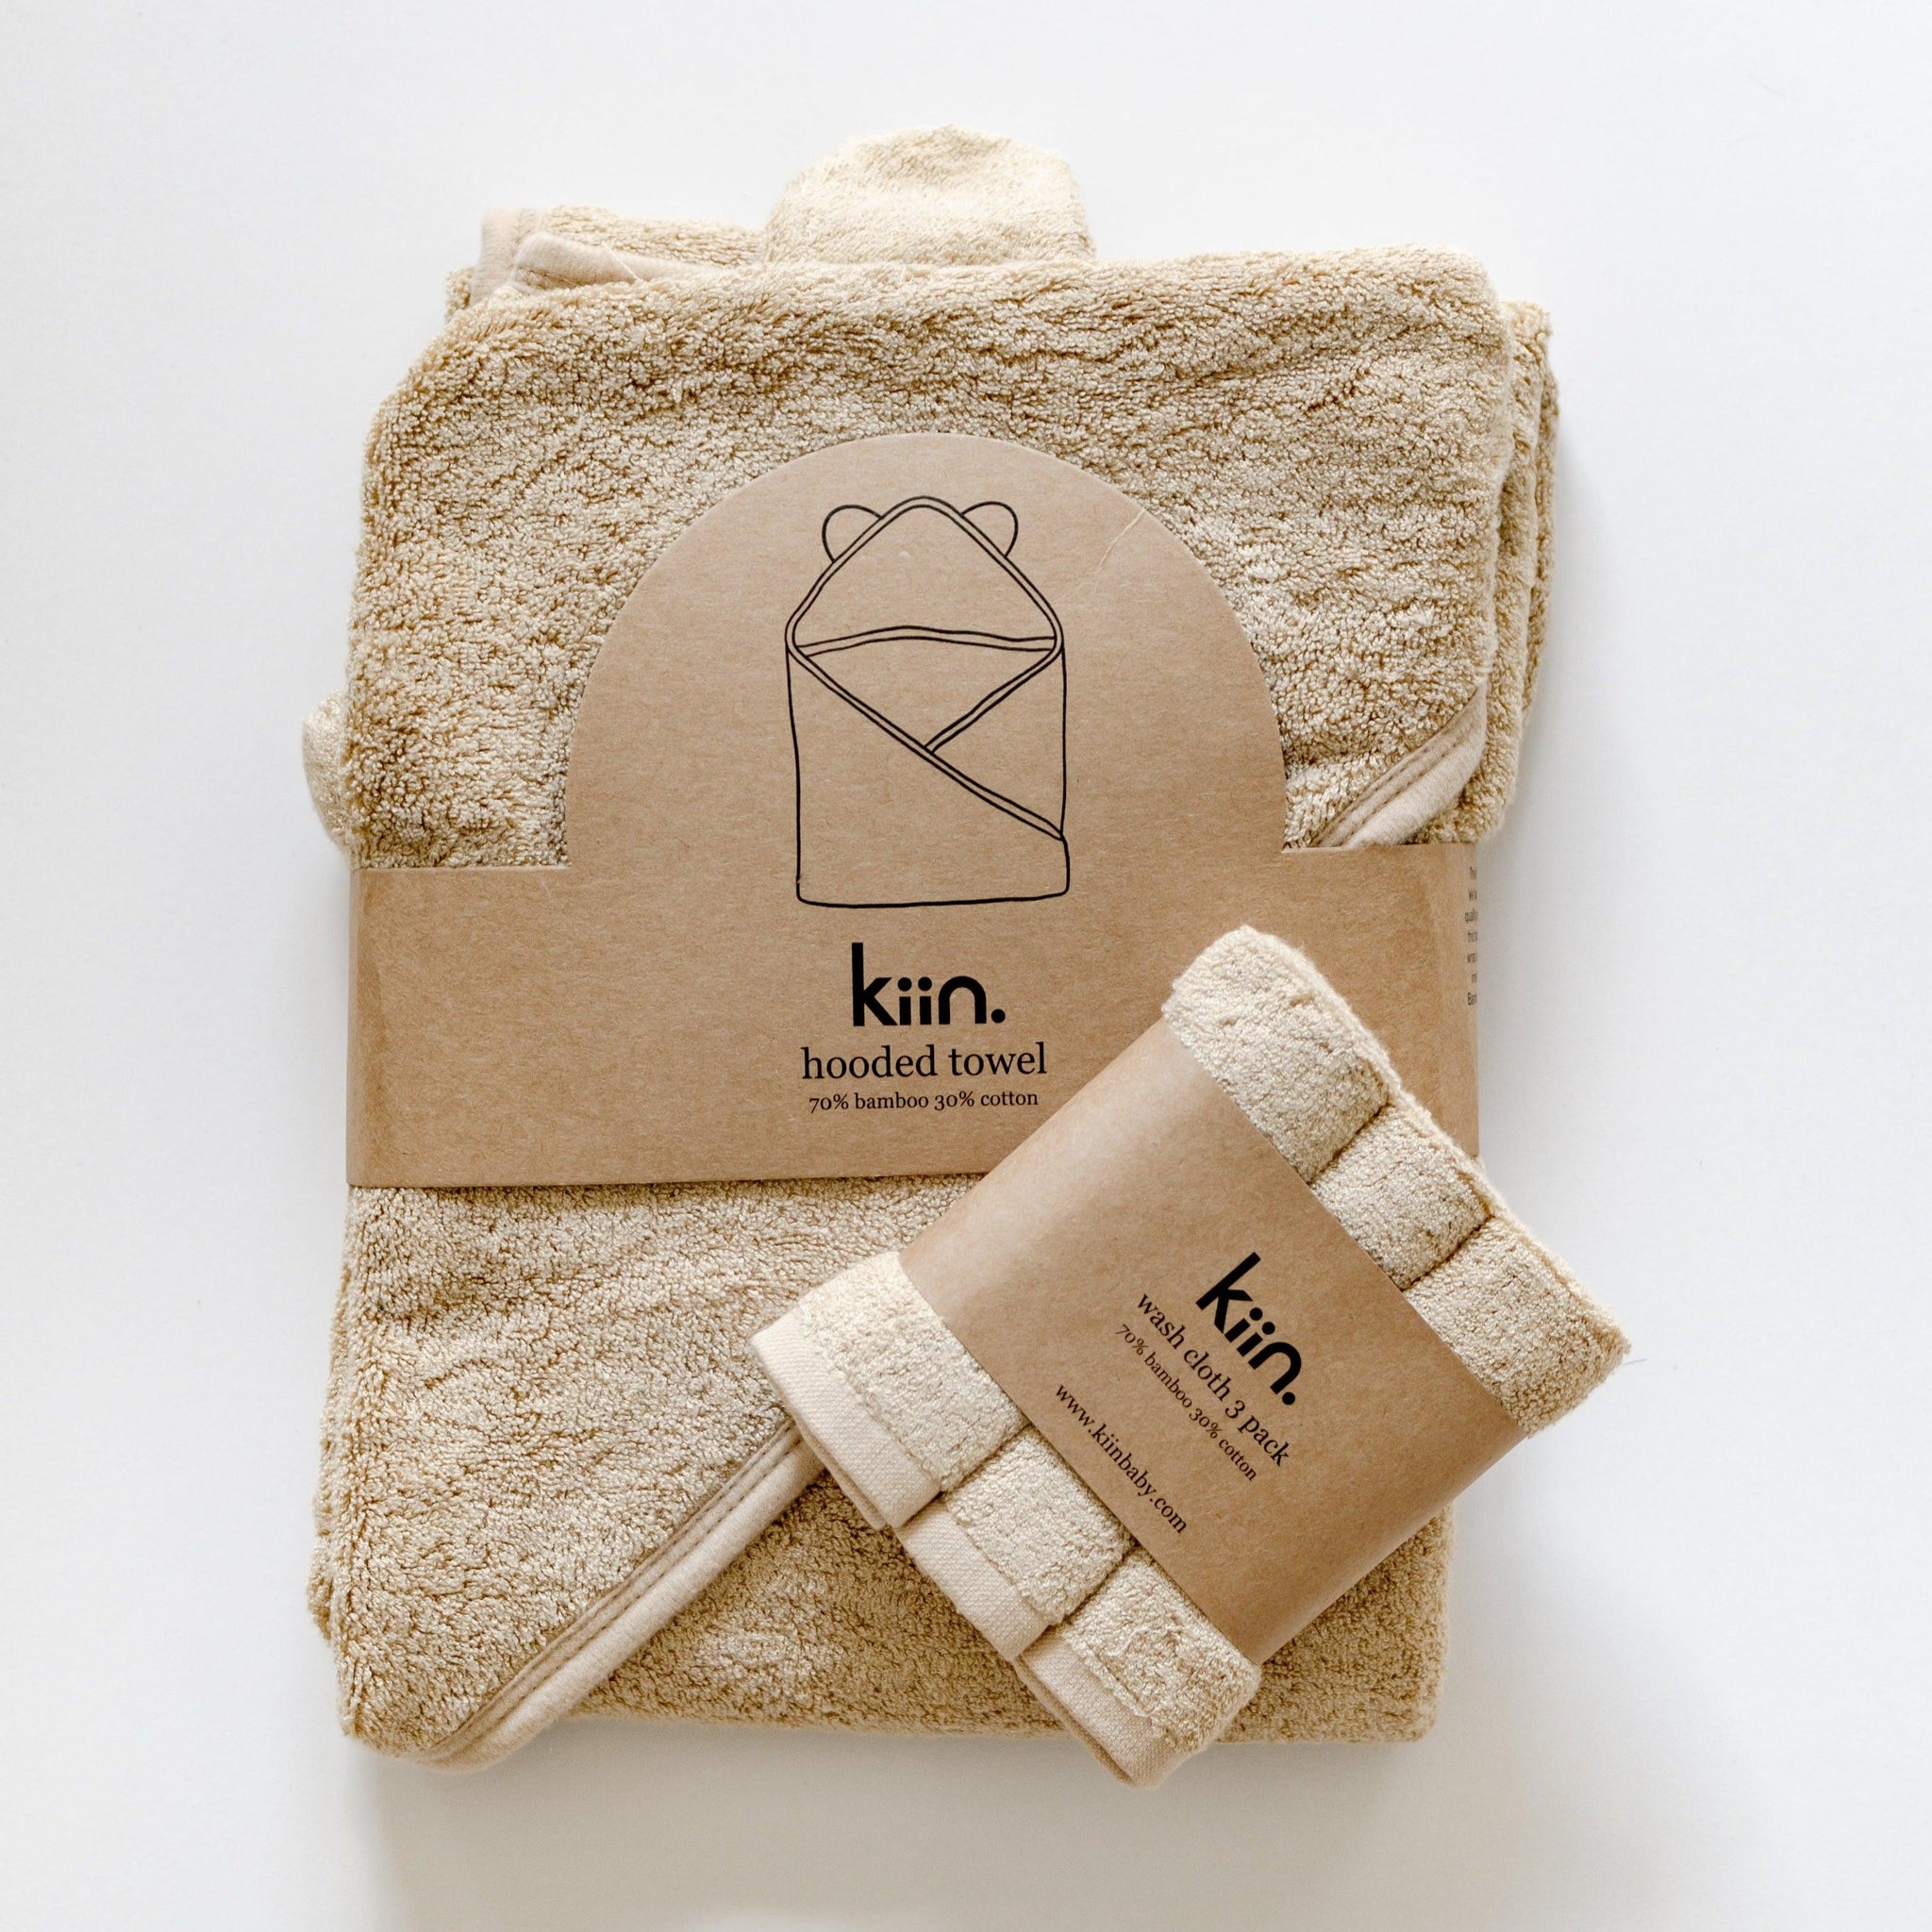 The Kiin Baby hooded towel is a bath time essential. It is both larger & thicker than most other baby towels on the market; made in a super soft, and luxuriously thick 600gsm cotton & bamboo blend, and measuring 90cm x 90cm.